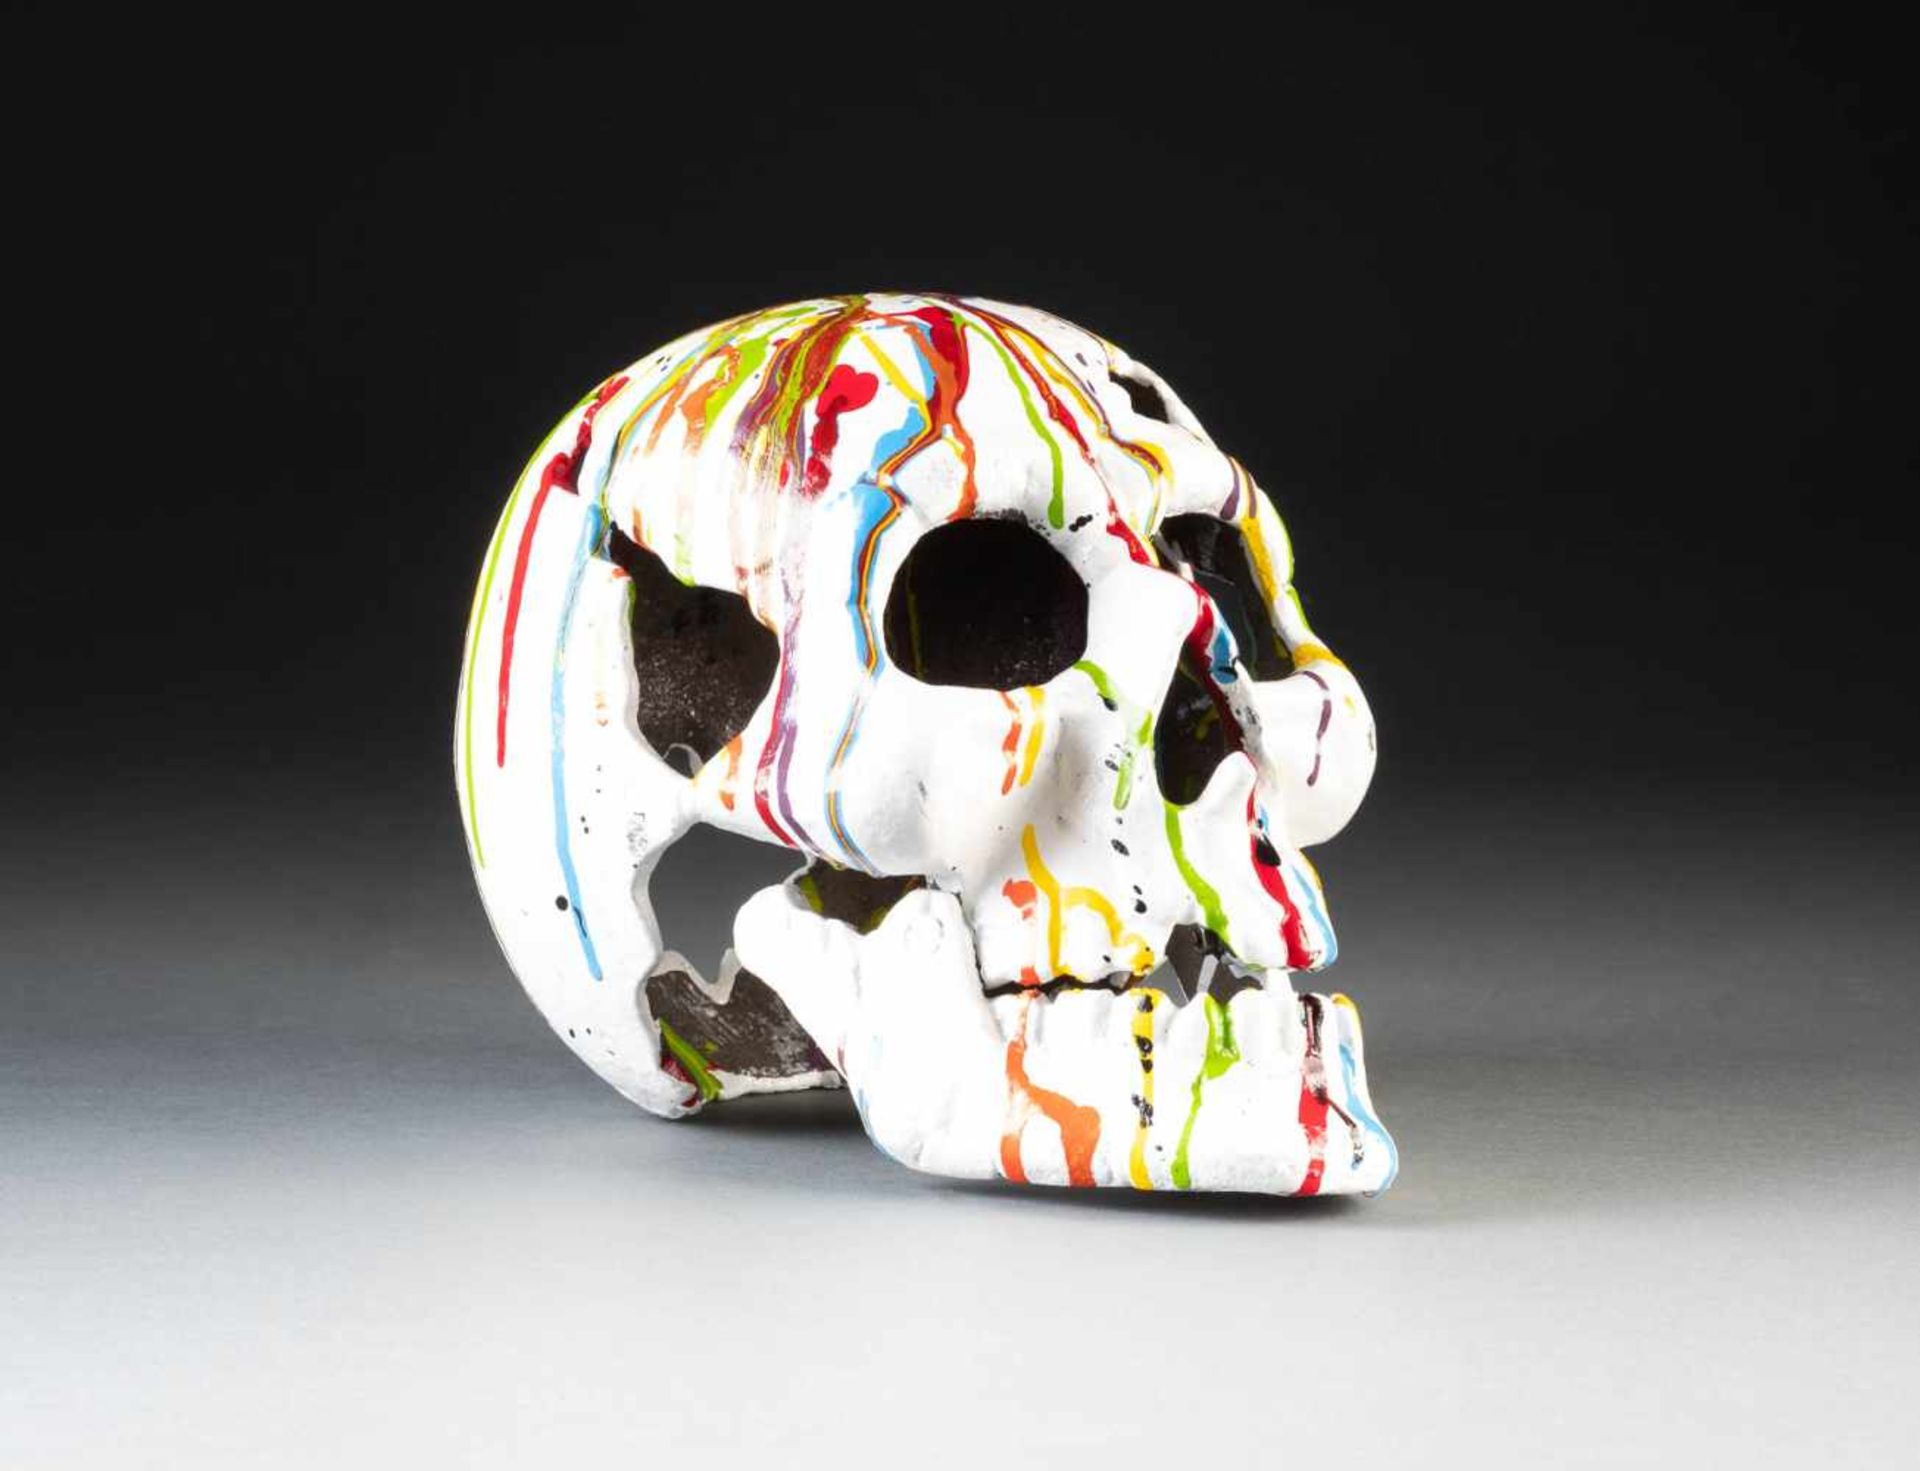 MODERN SCULPTORActive in the 2nd half of the 20th century SKULL Cast metal, polychrome painted. H.